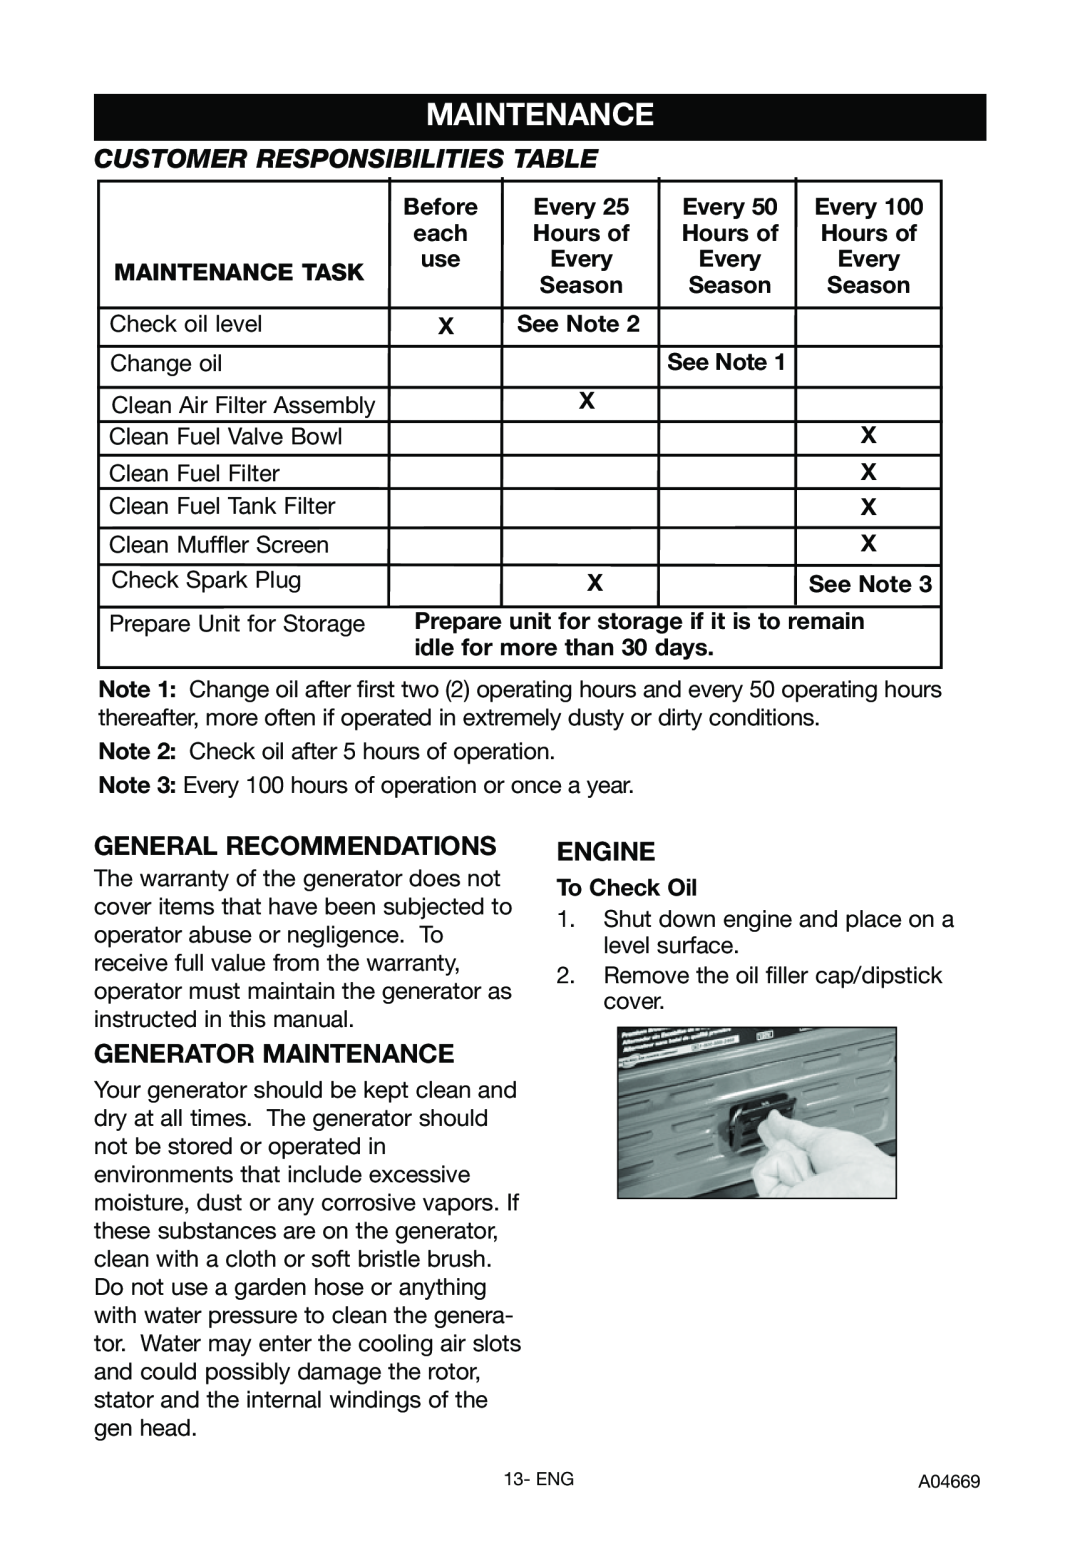 DeVillbiss Air Power Company A04669, GM1000 Maintenance, Customer Responsibilities Table, General Recommendations, Engine 